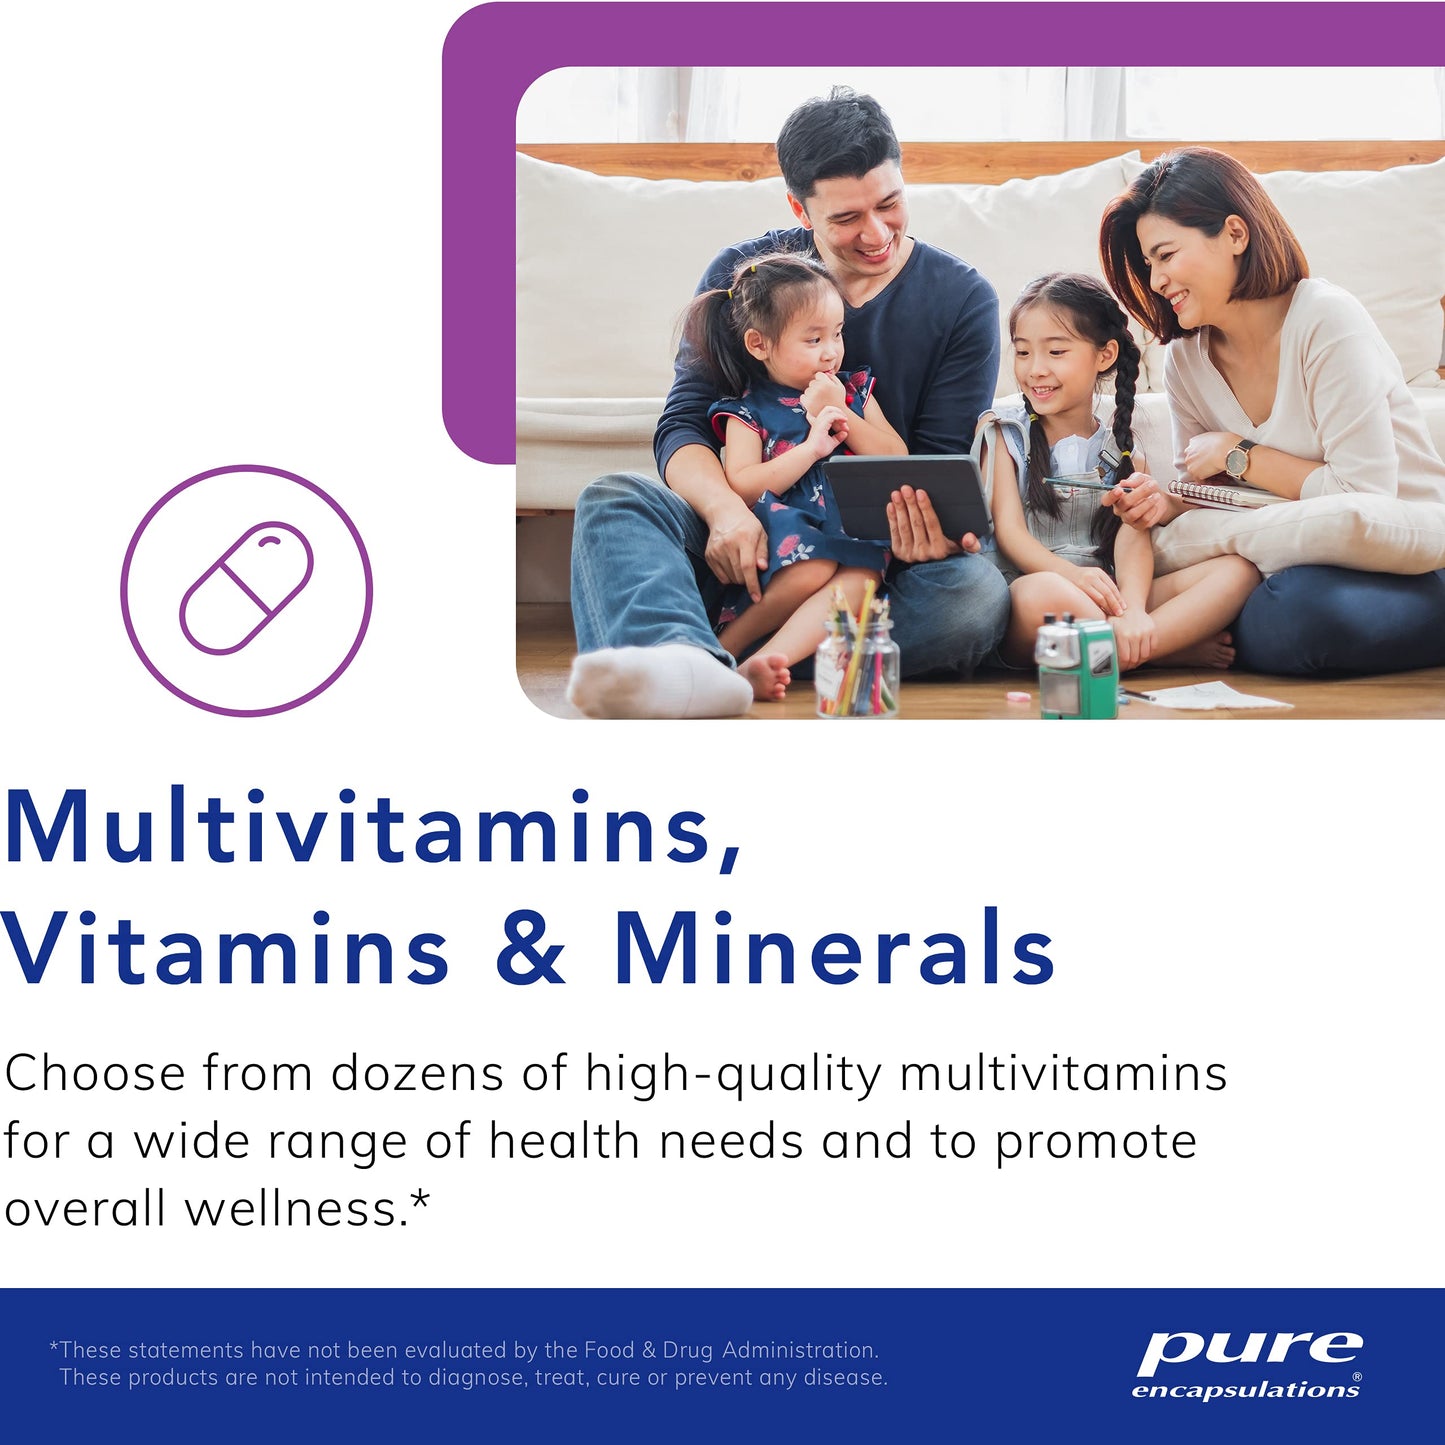 Pure Encapsulations Vitamin D3 125 mcg (5,000 IU) - Supplement to Support Bone, Joint, Breast, Heart, Colon, and Immune Health* - with Vitamin D - 120 Capsules